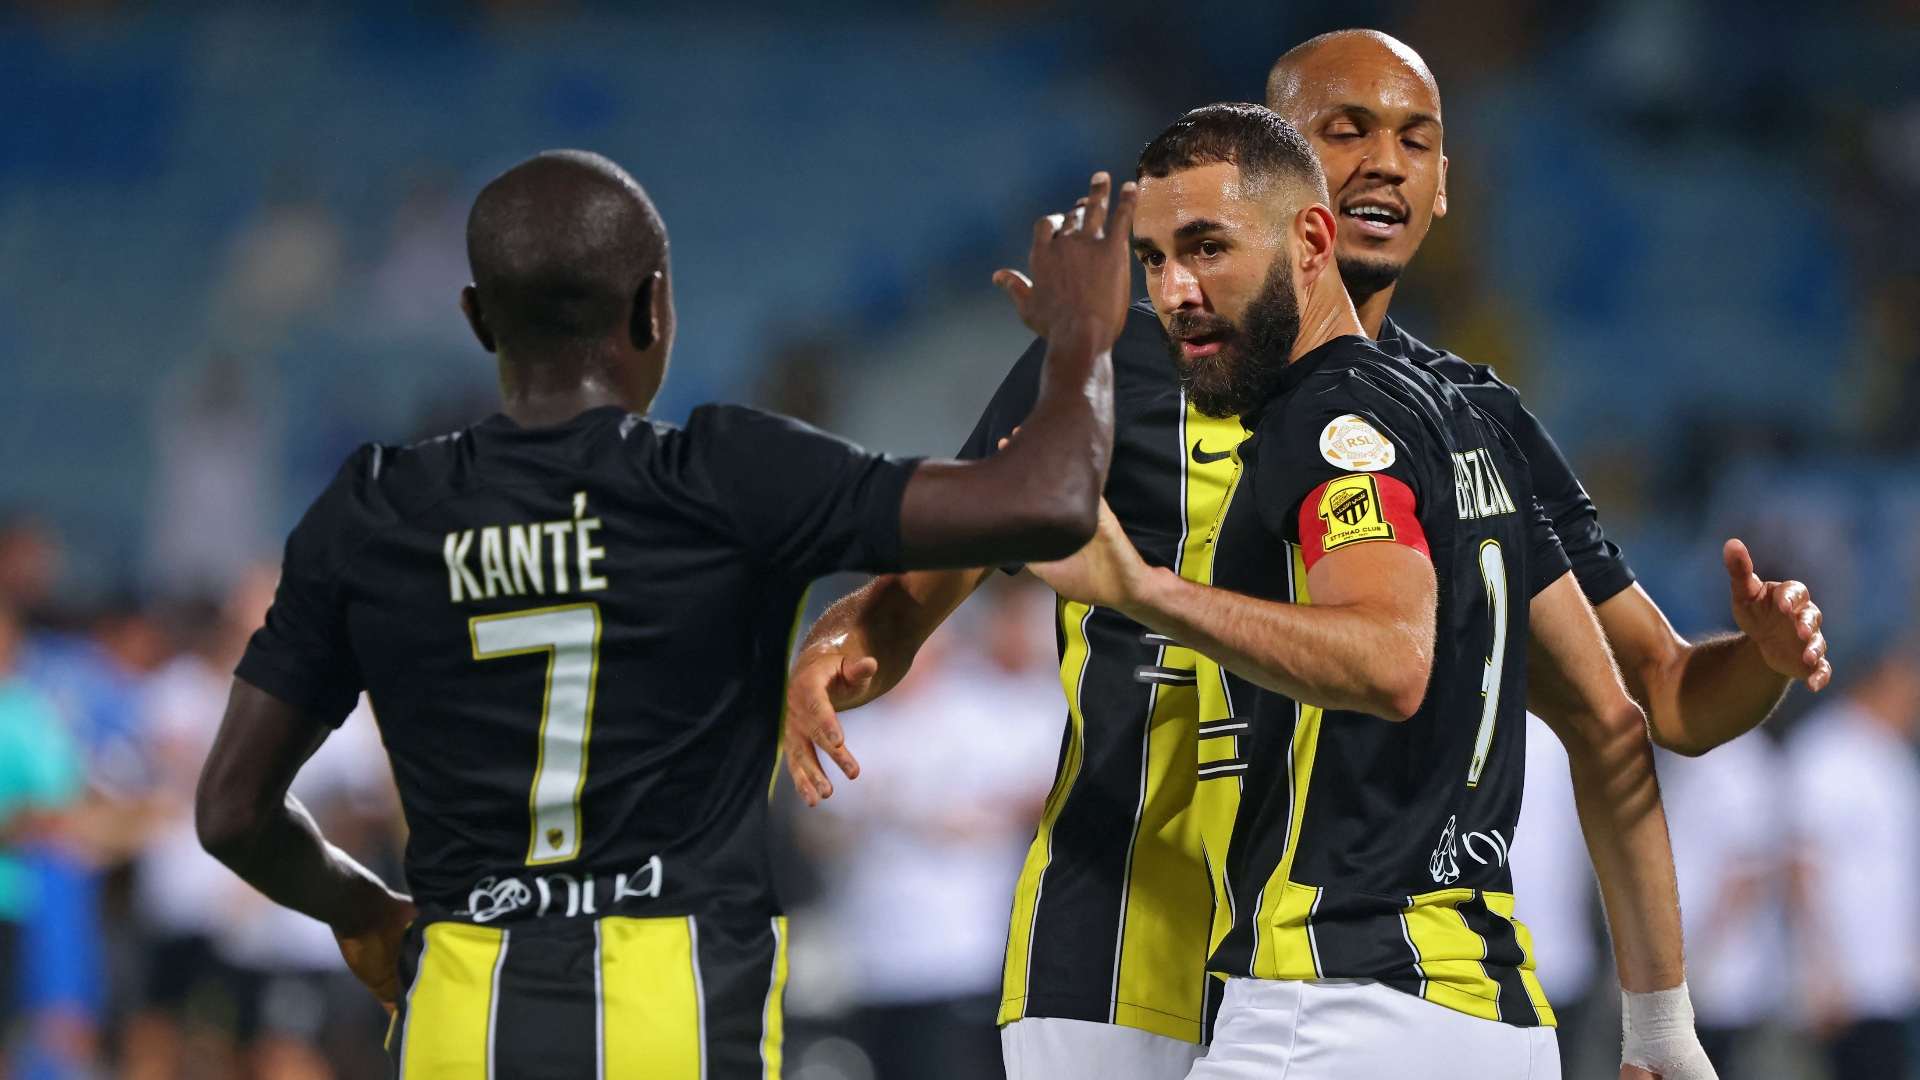 59 Sepahan V Al Ittihad Afc Champions League Photos & High Res Pictures -  Getty Images